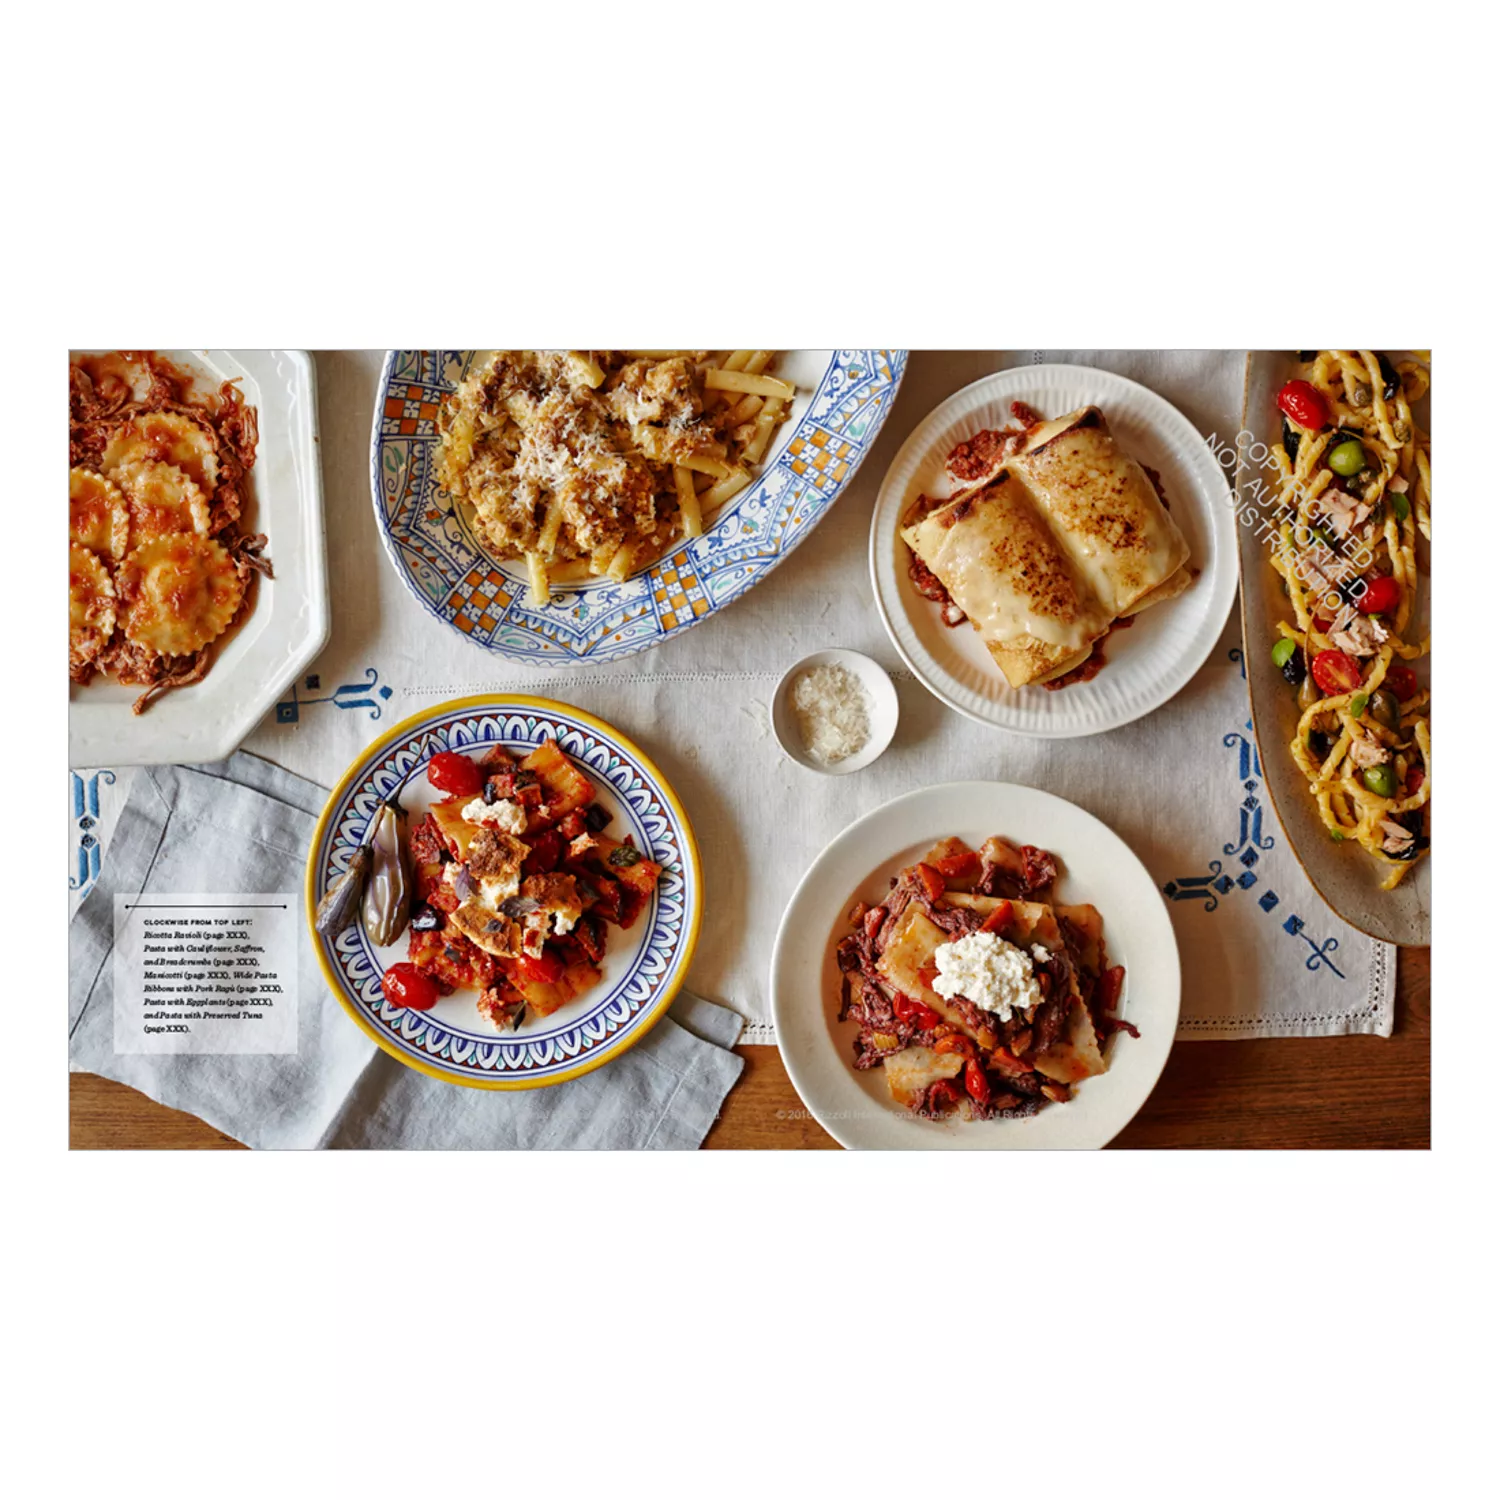 Sur La Table Sicily: The Cookbook: Recipes Rooted in Traditions